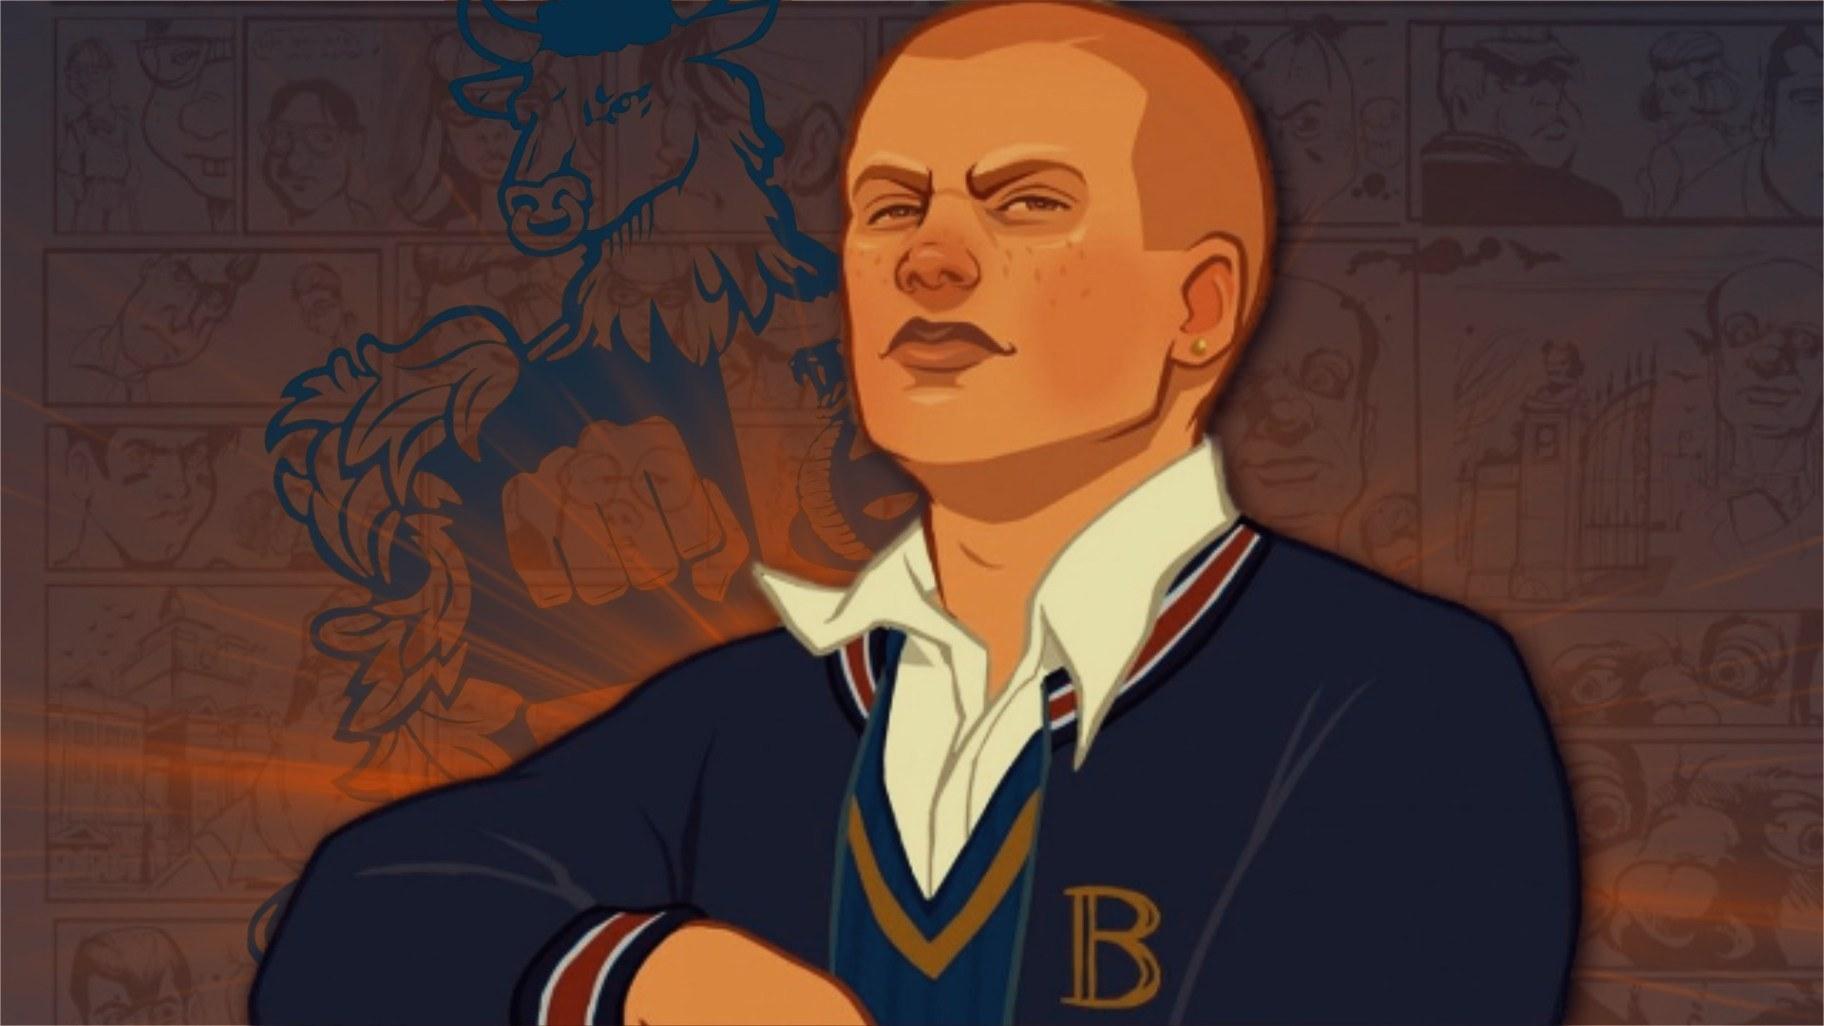 Jimmy Hopkins from the Rockstar Game "Bully"